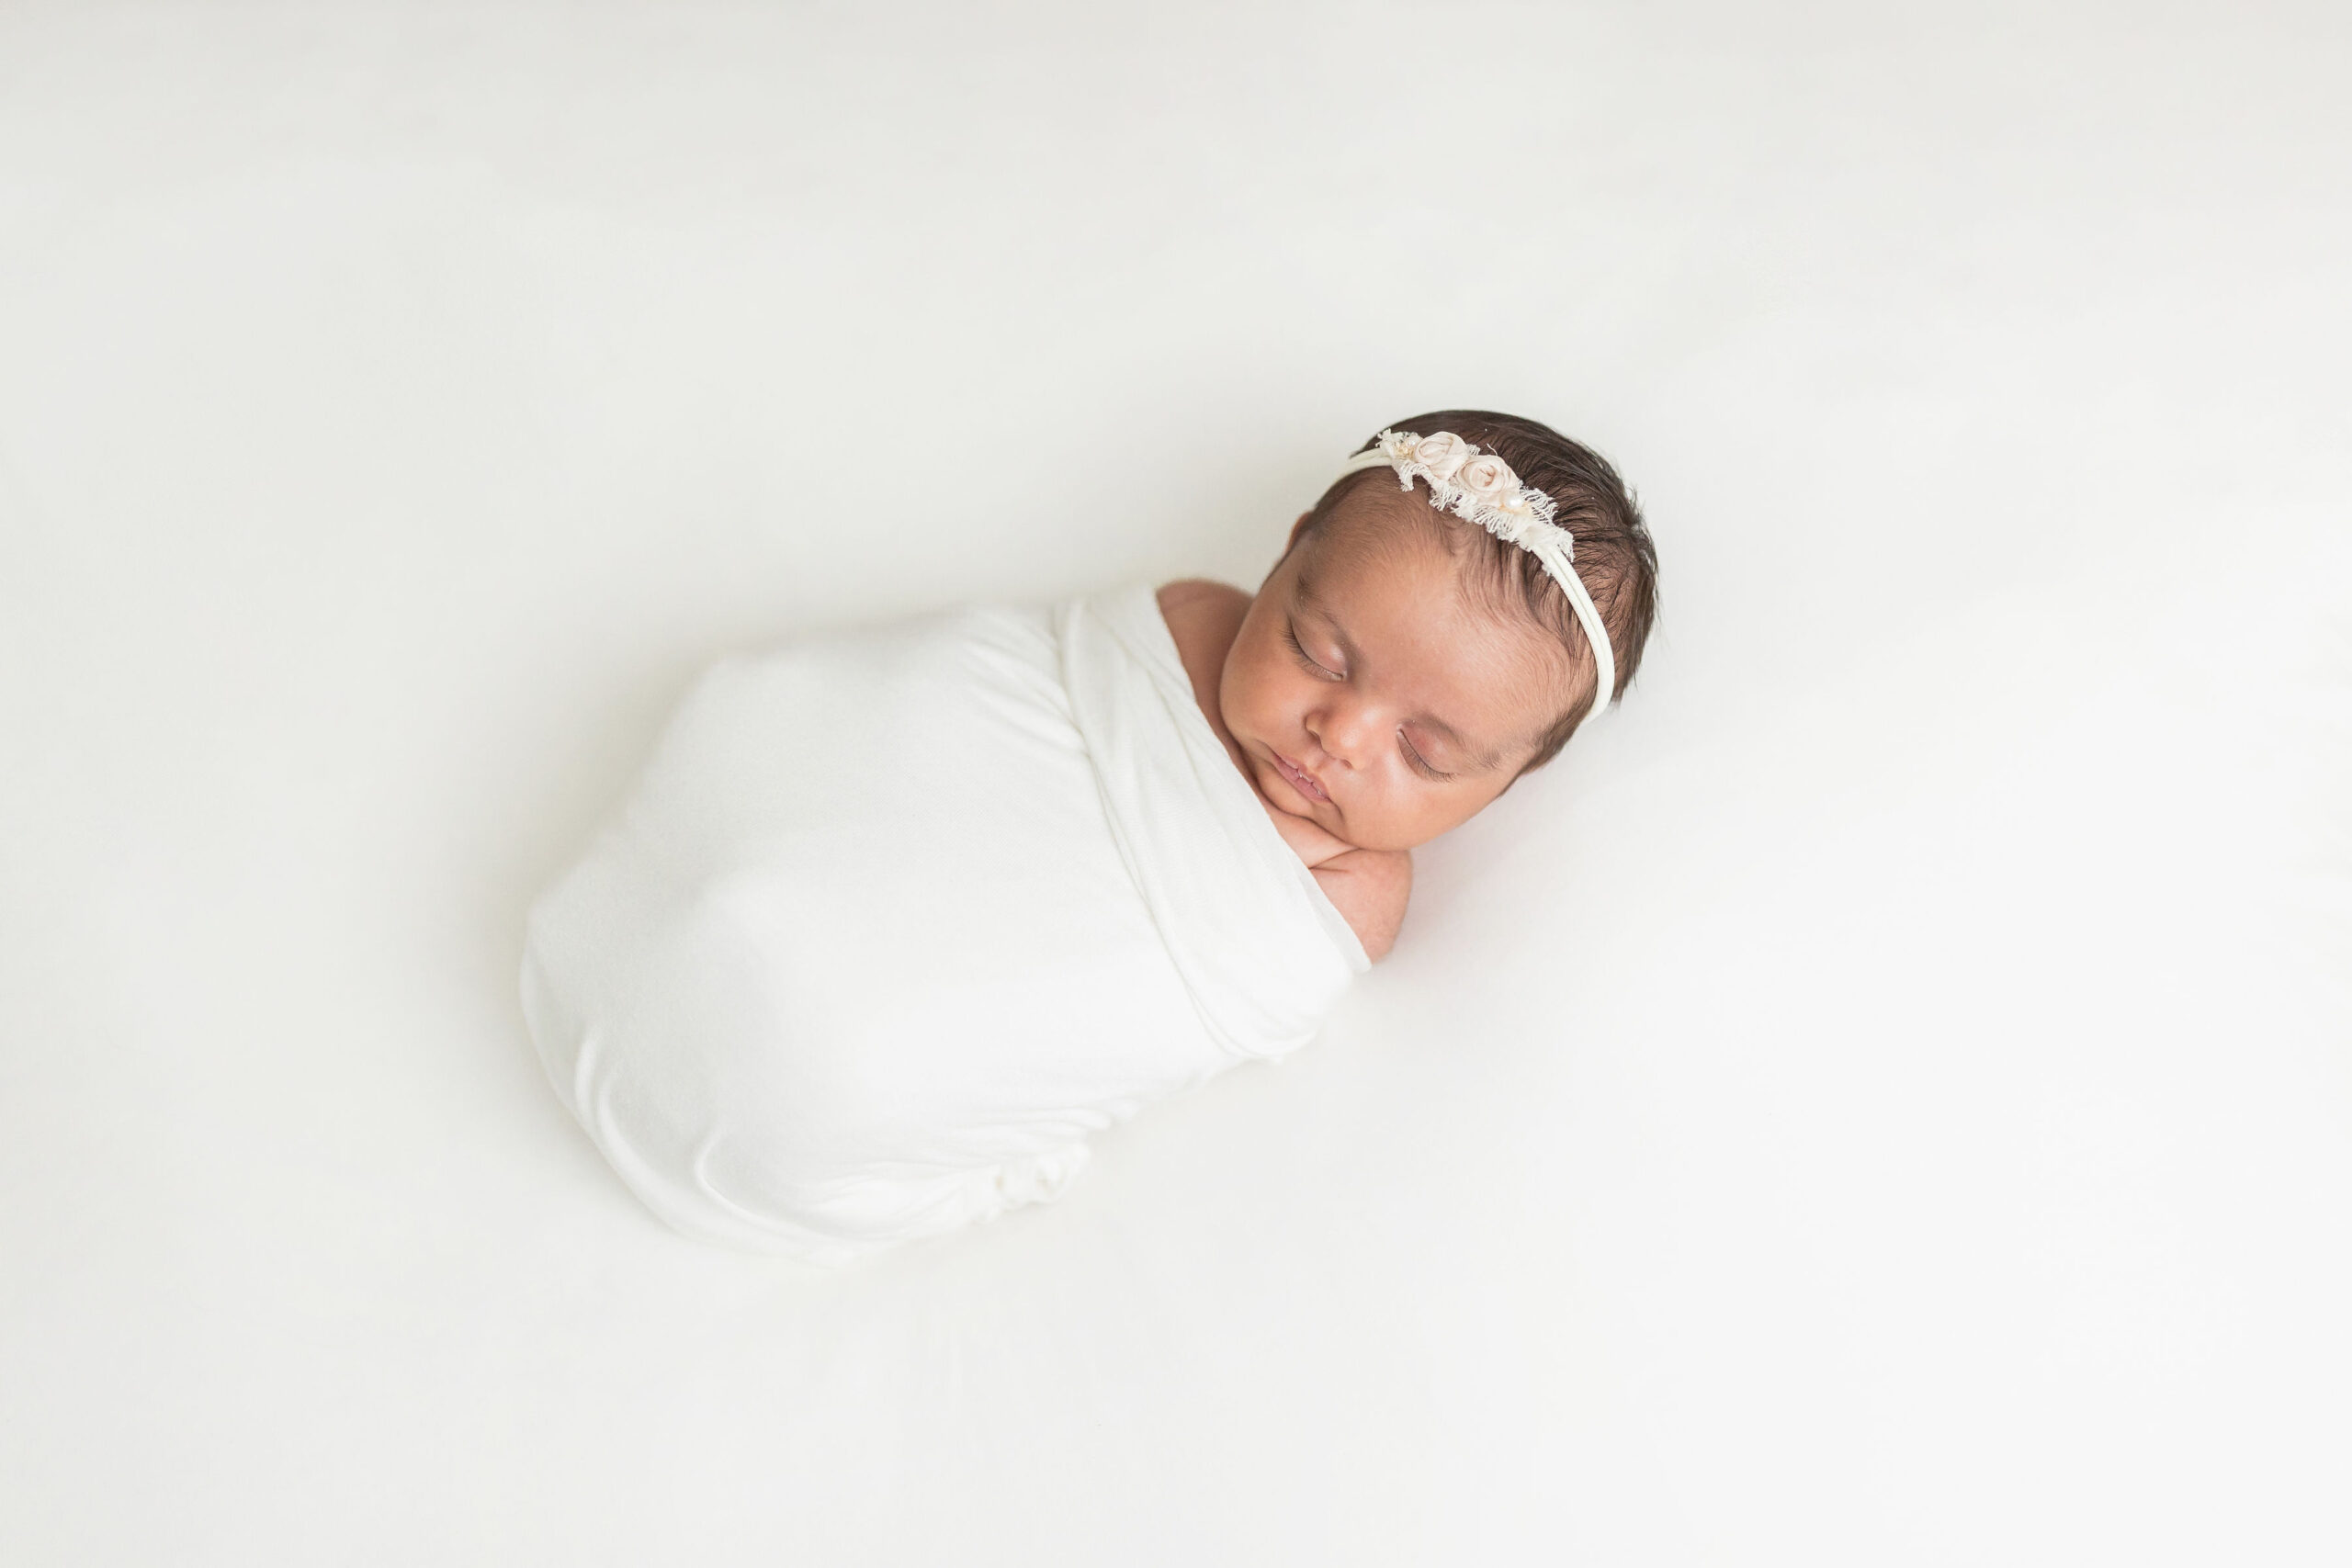 A newborn baby sleeps in a white swaddle with shoulders out on a white bed